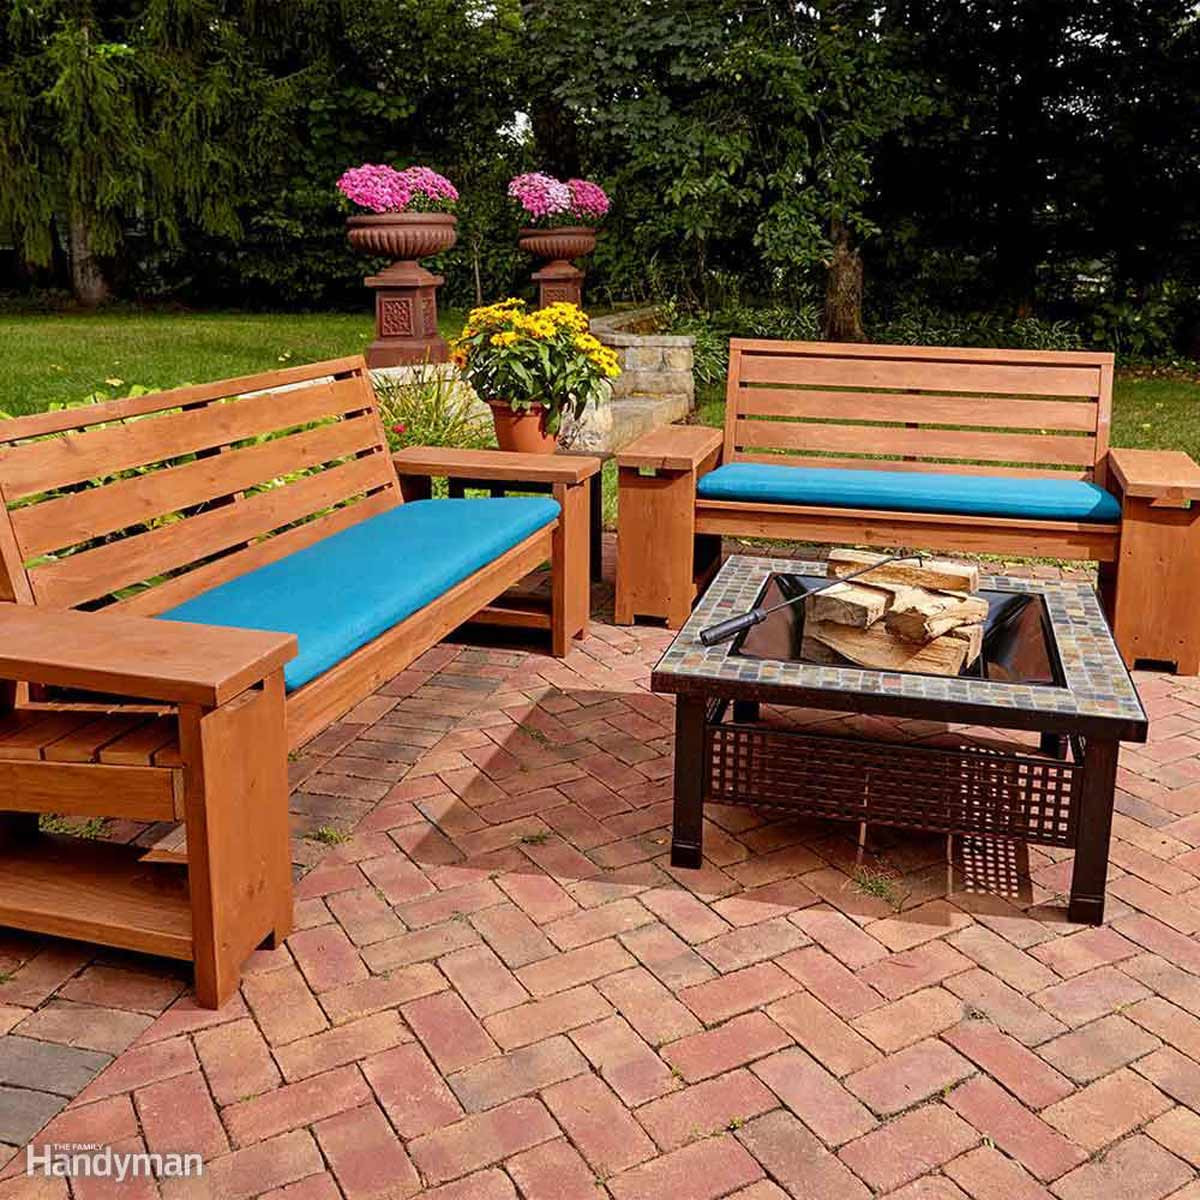 Outdoor Furniture Ideas DIY
 15 Awesome Plans for DIY Patio Furniture